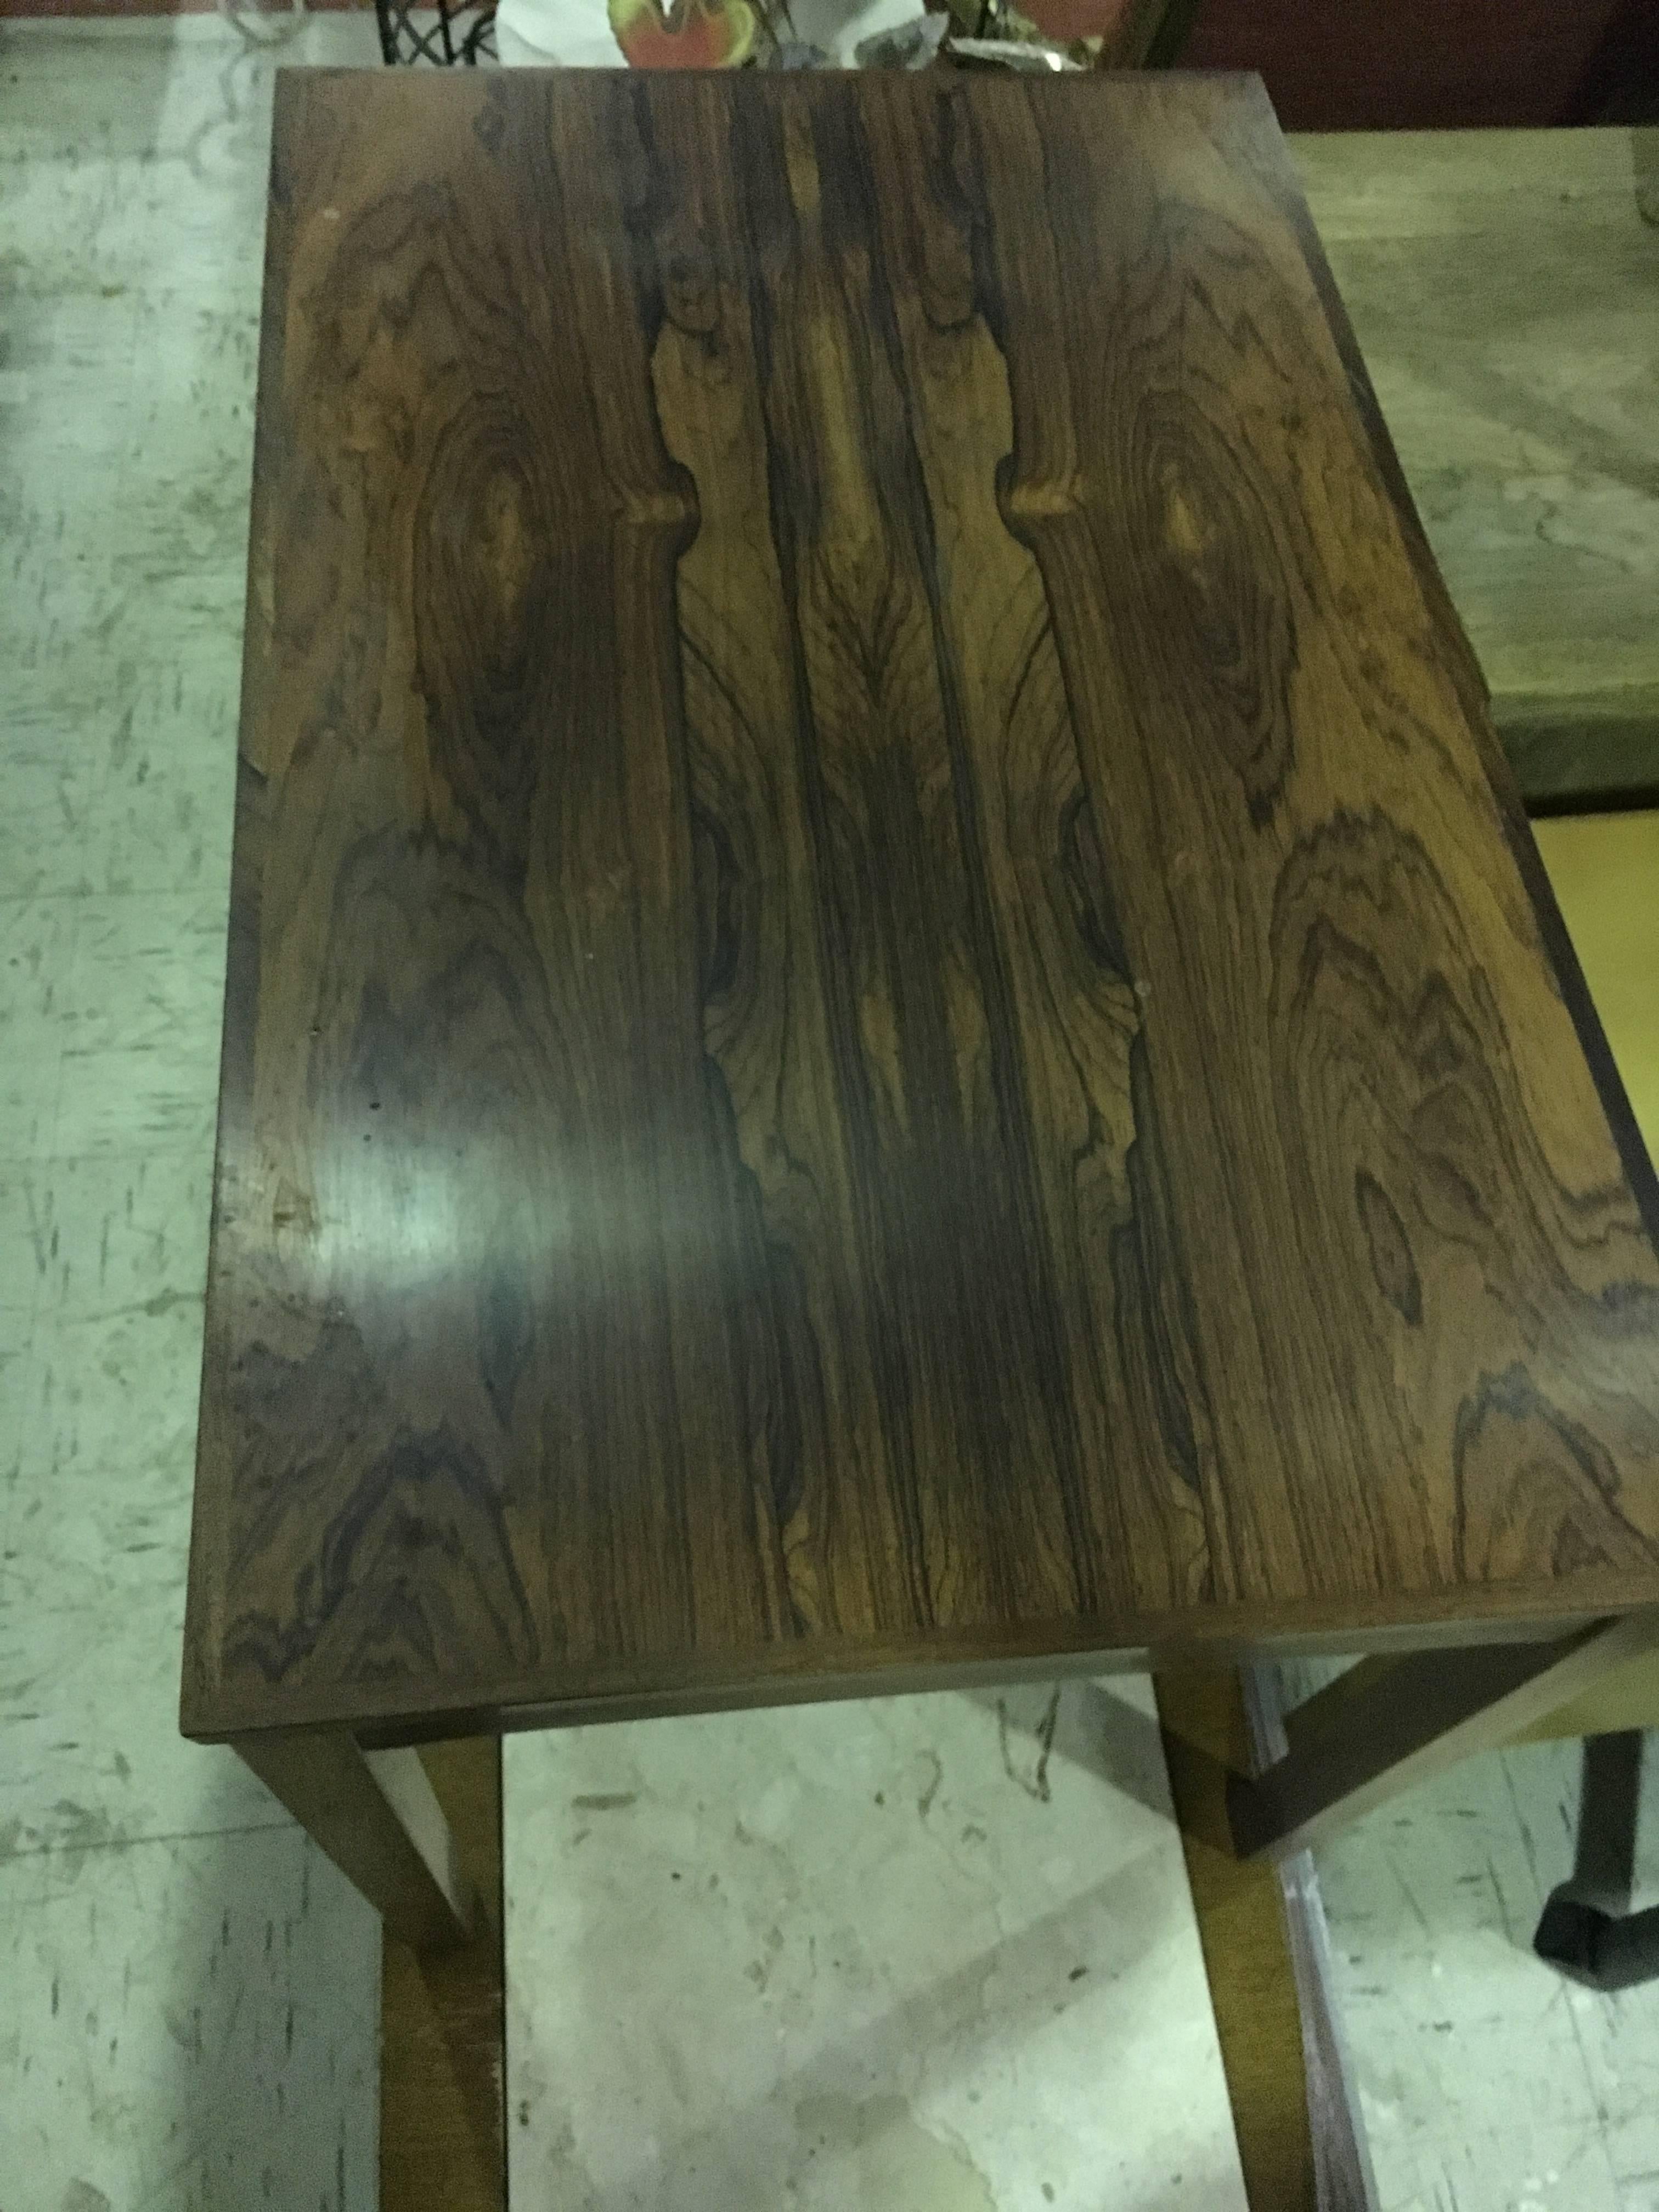 Mid-Century rose wood side table or small coffee table. Beautiful figured top.